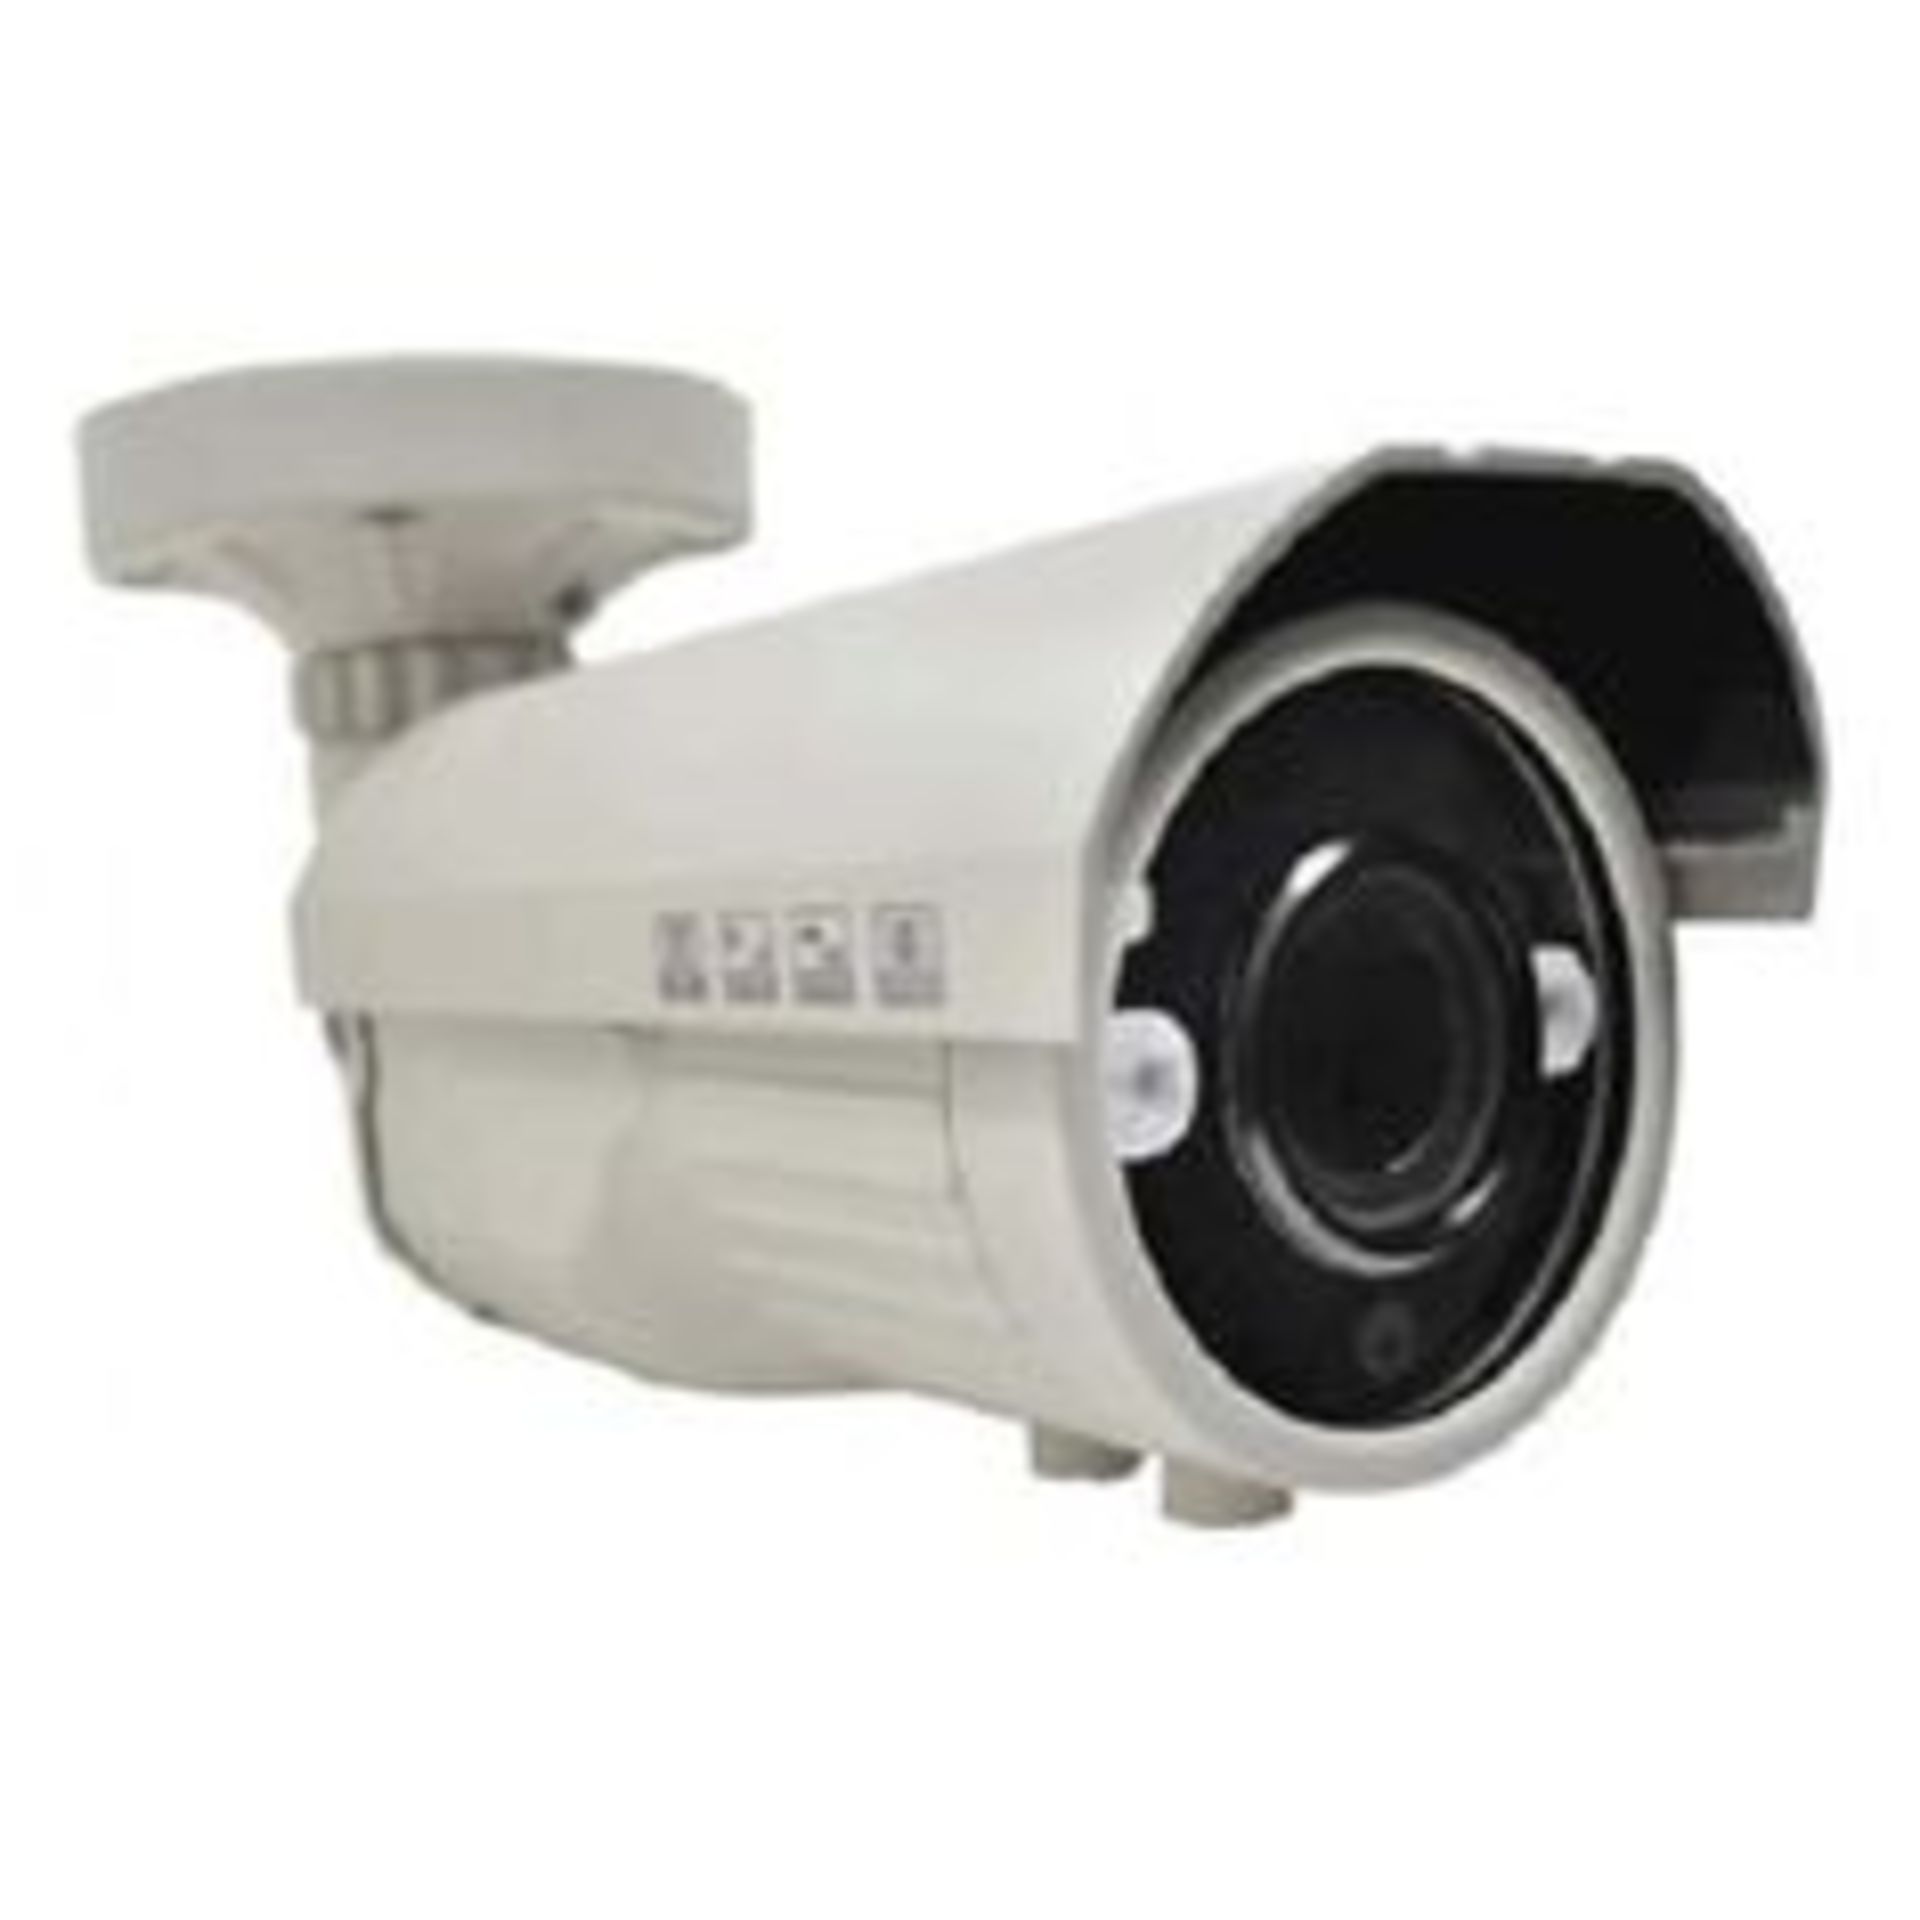 V Brand New Avtech Bullet Camera- 1/3" Sony Colour CCD, 540TVL-25m distance, Weather Resistant IP65,